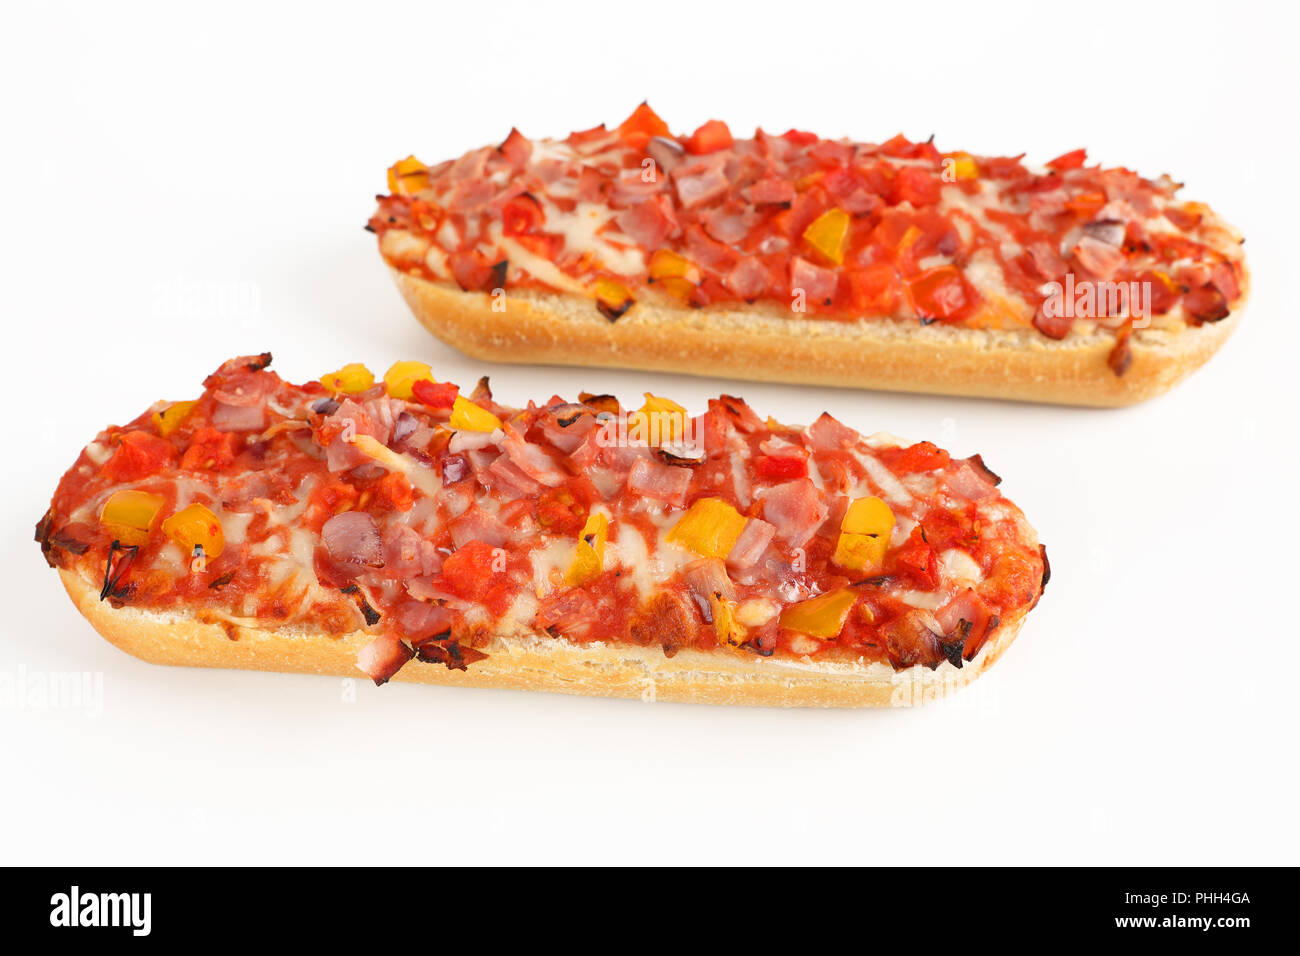 pizza baguette with ham Stock Photo